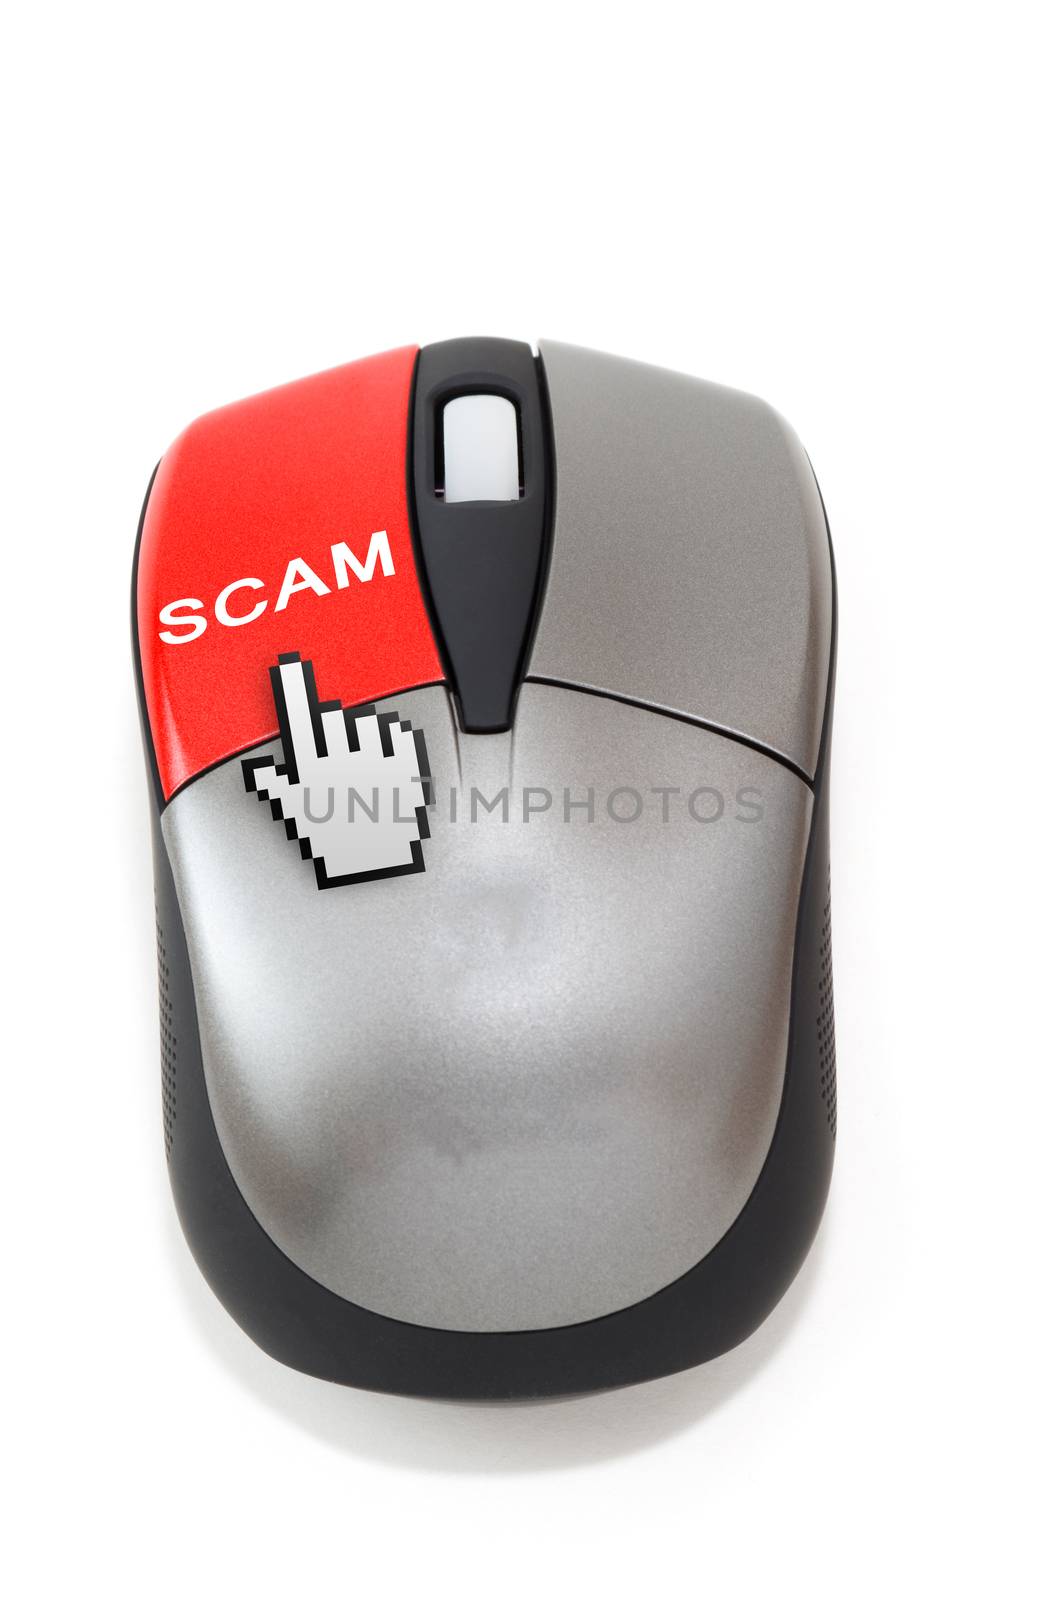 Hand cursor clicking on scam button by daoleduc